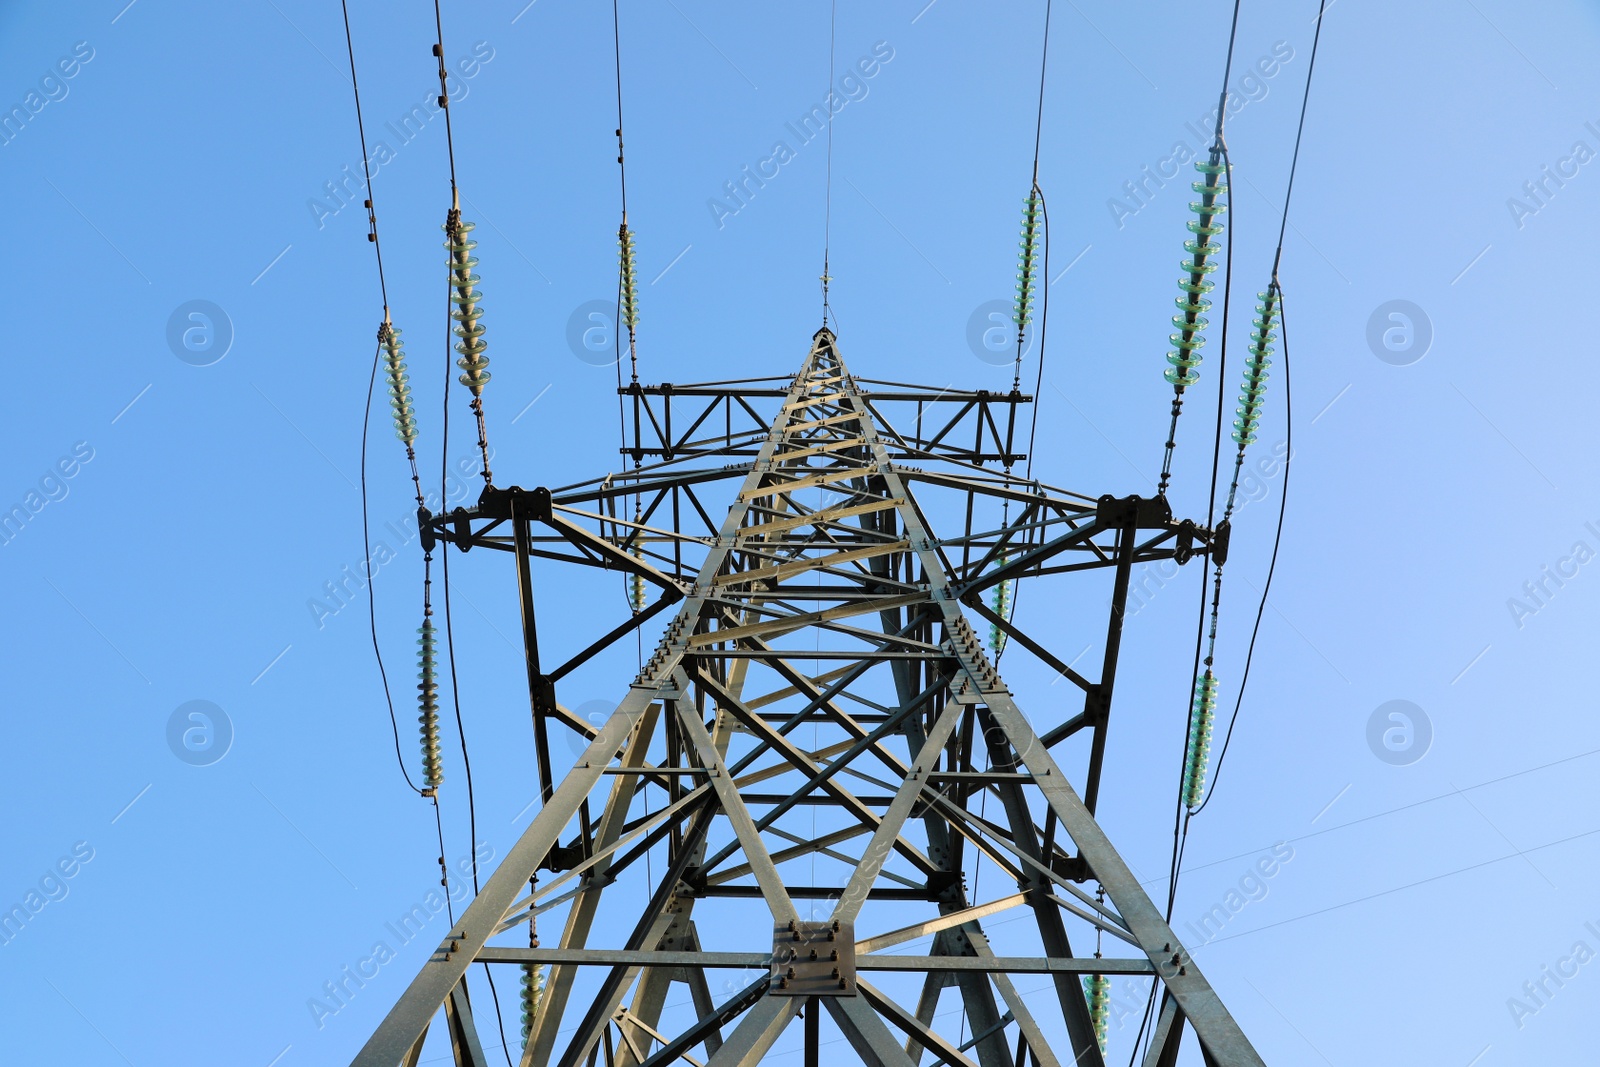 Photo of High voltage tower against blue sky on sunny day, low angle view